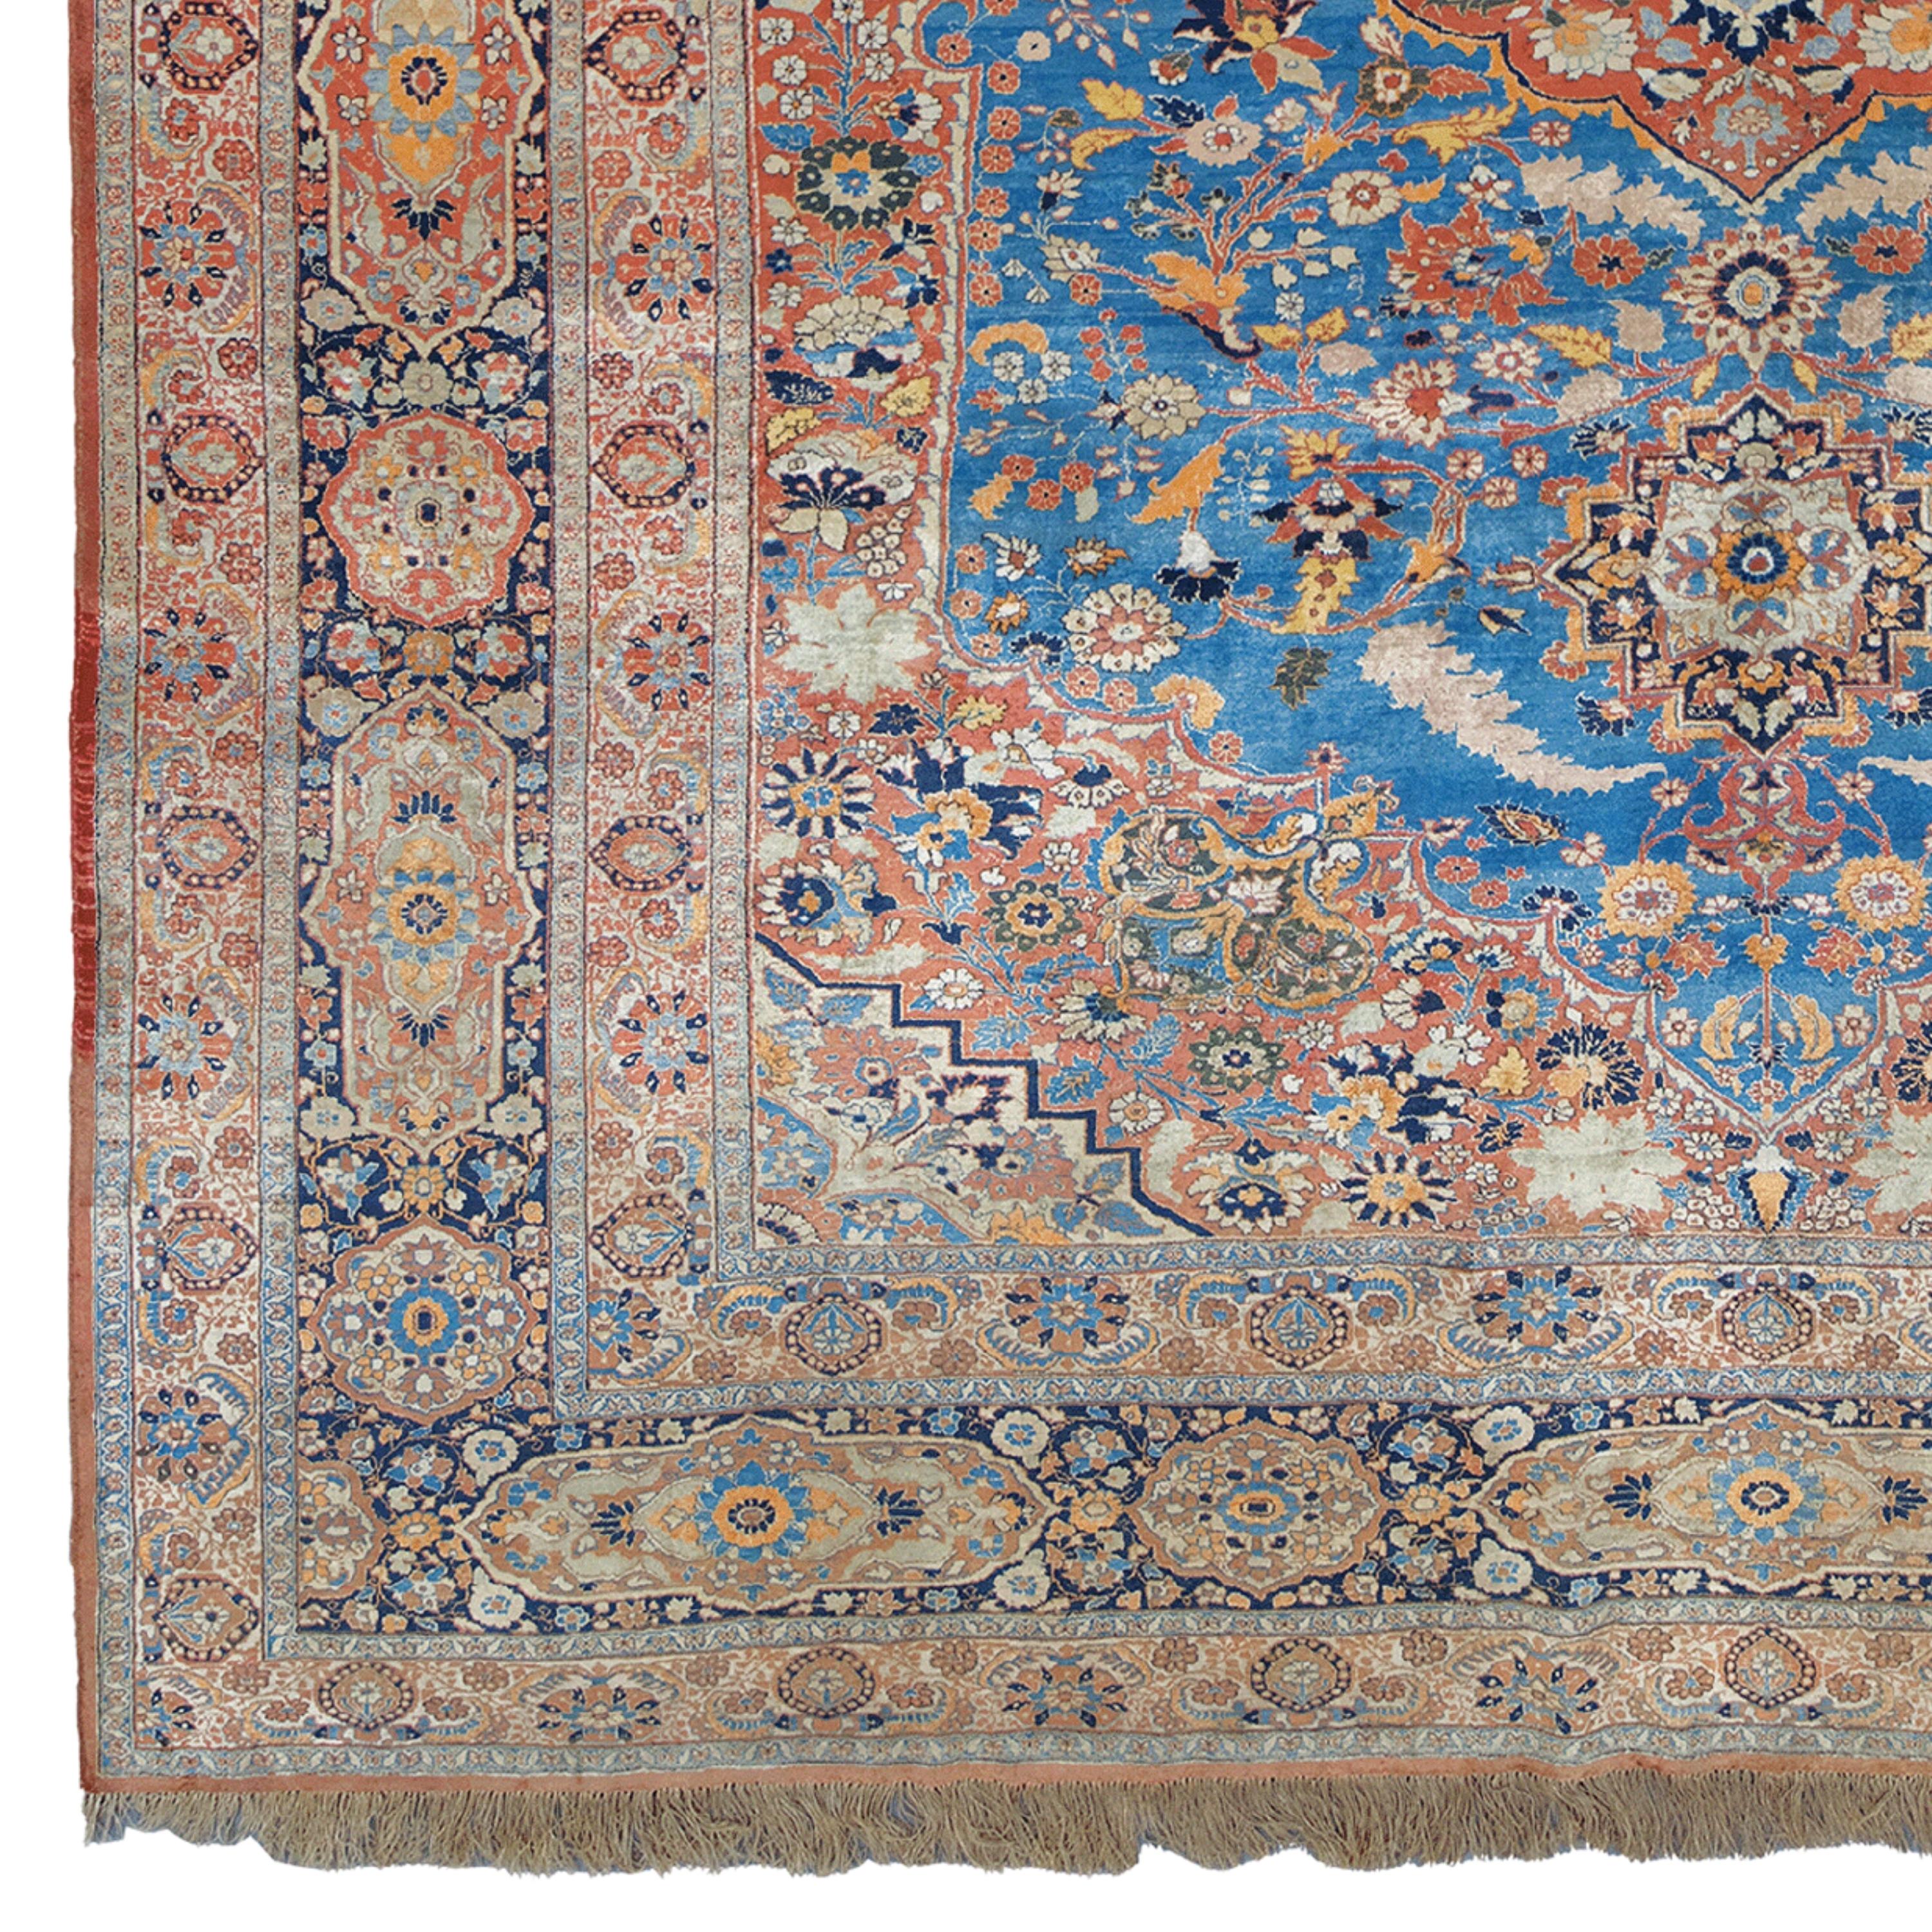 19th Century Silk Tabriz Carpet

This elegant 19th-century silk Tabriz rug adds nobility to any space with its historical beauty and sophisticated craftsmanship. Presenting the harmony of blue, beige and red, this work is eye-catching with its